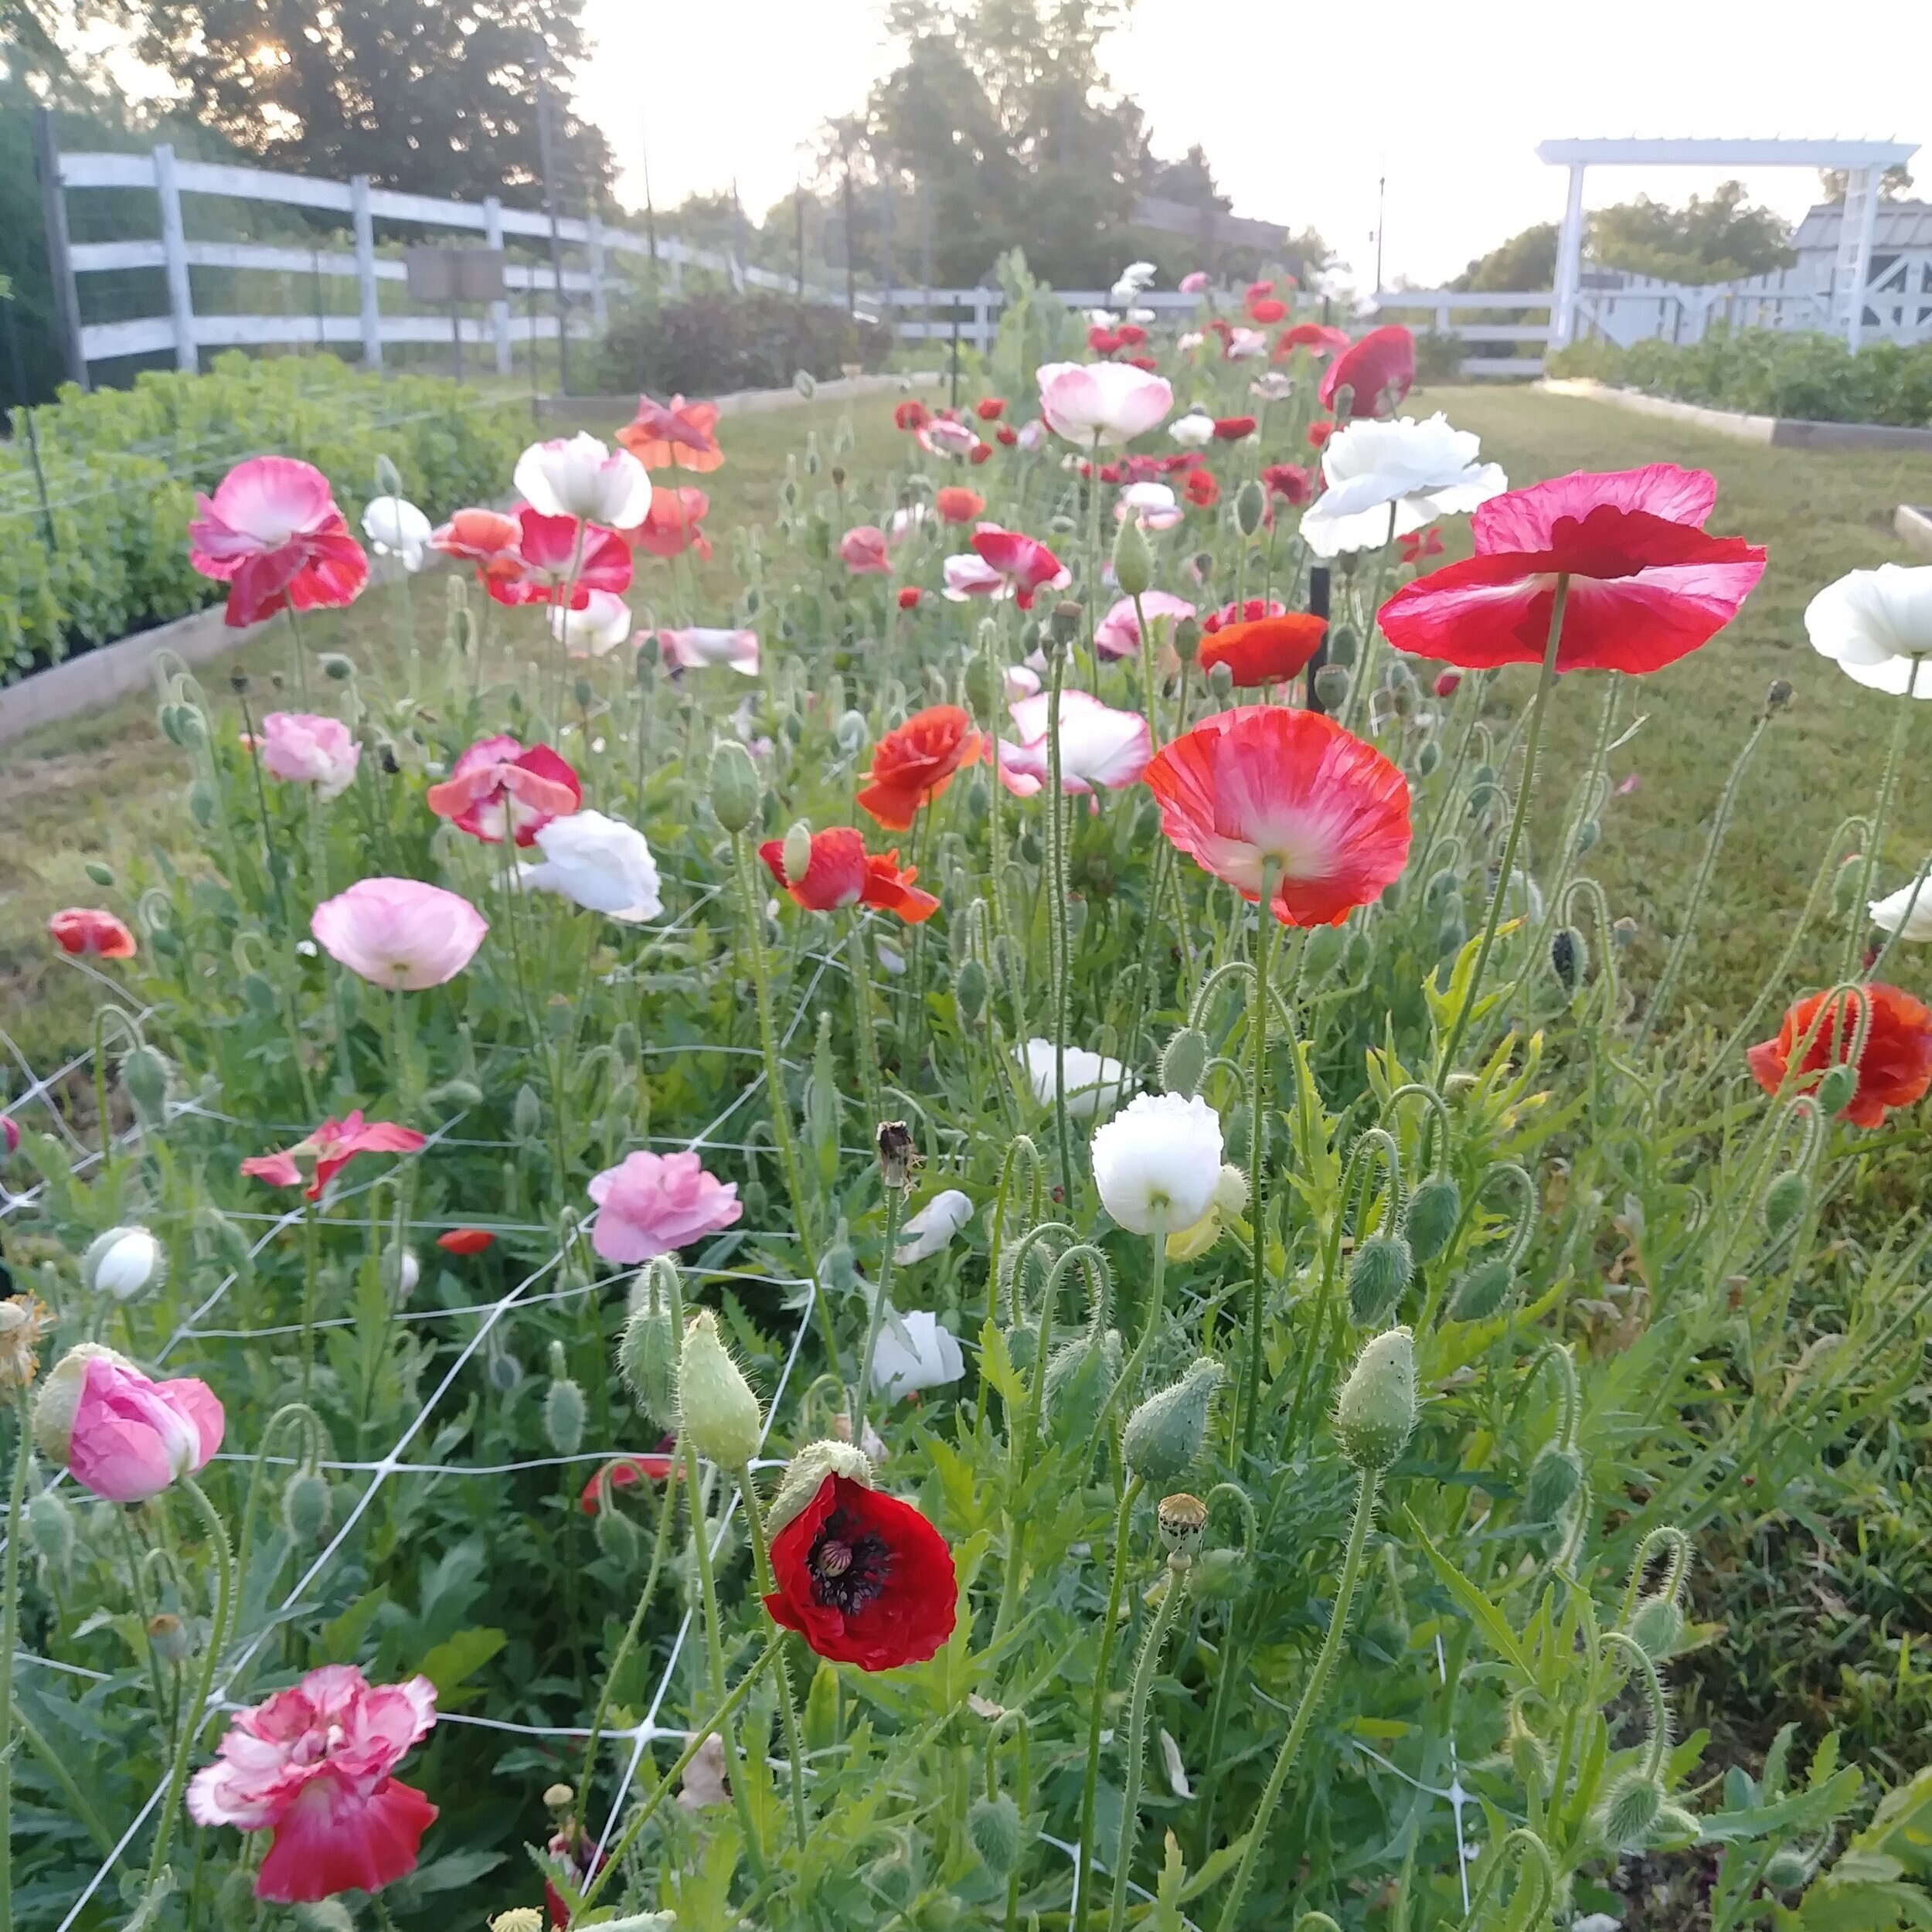 How Long Do Poppies Last Once Cut?